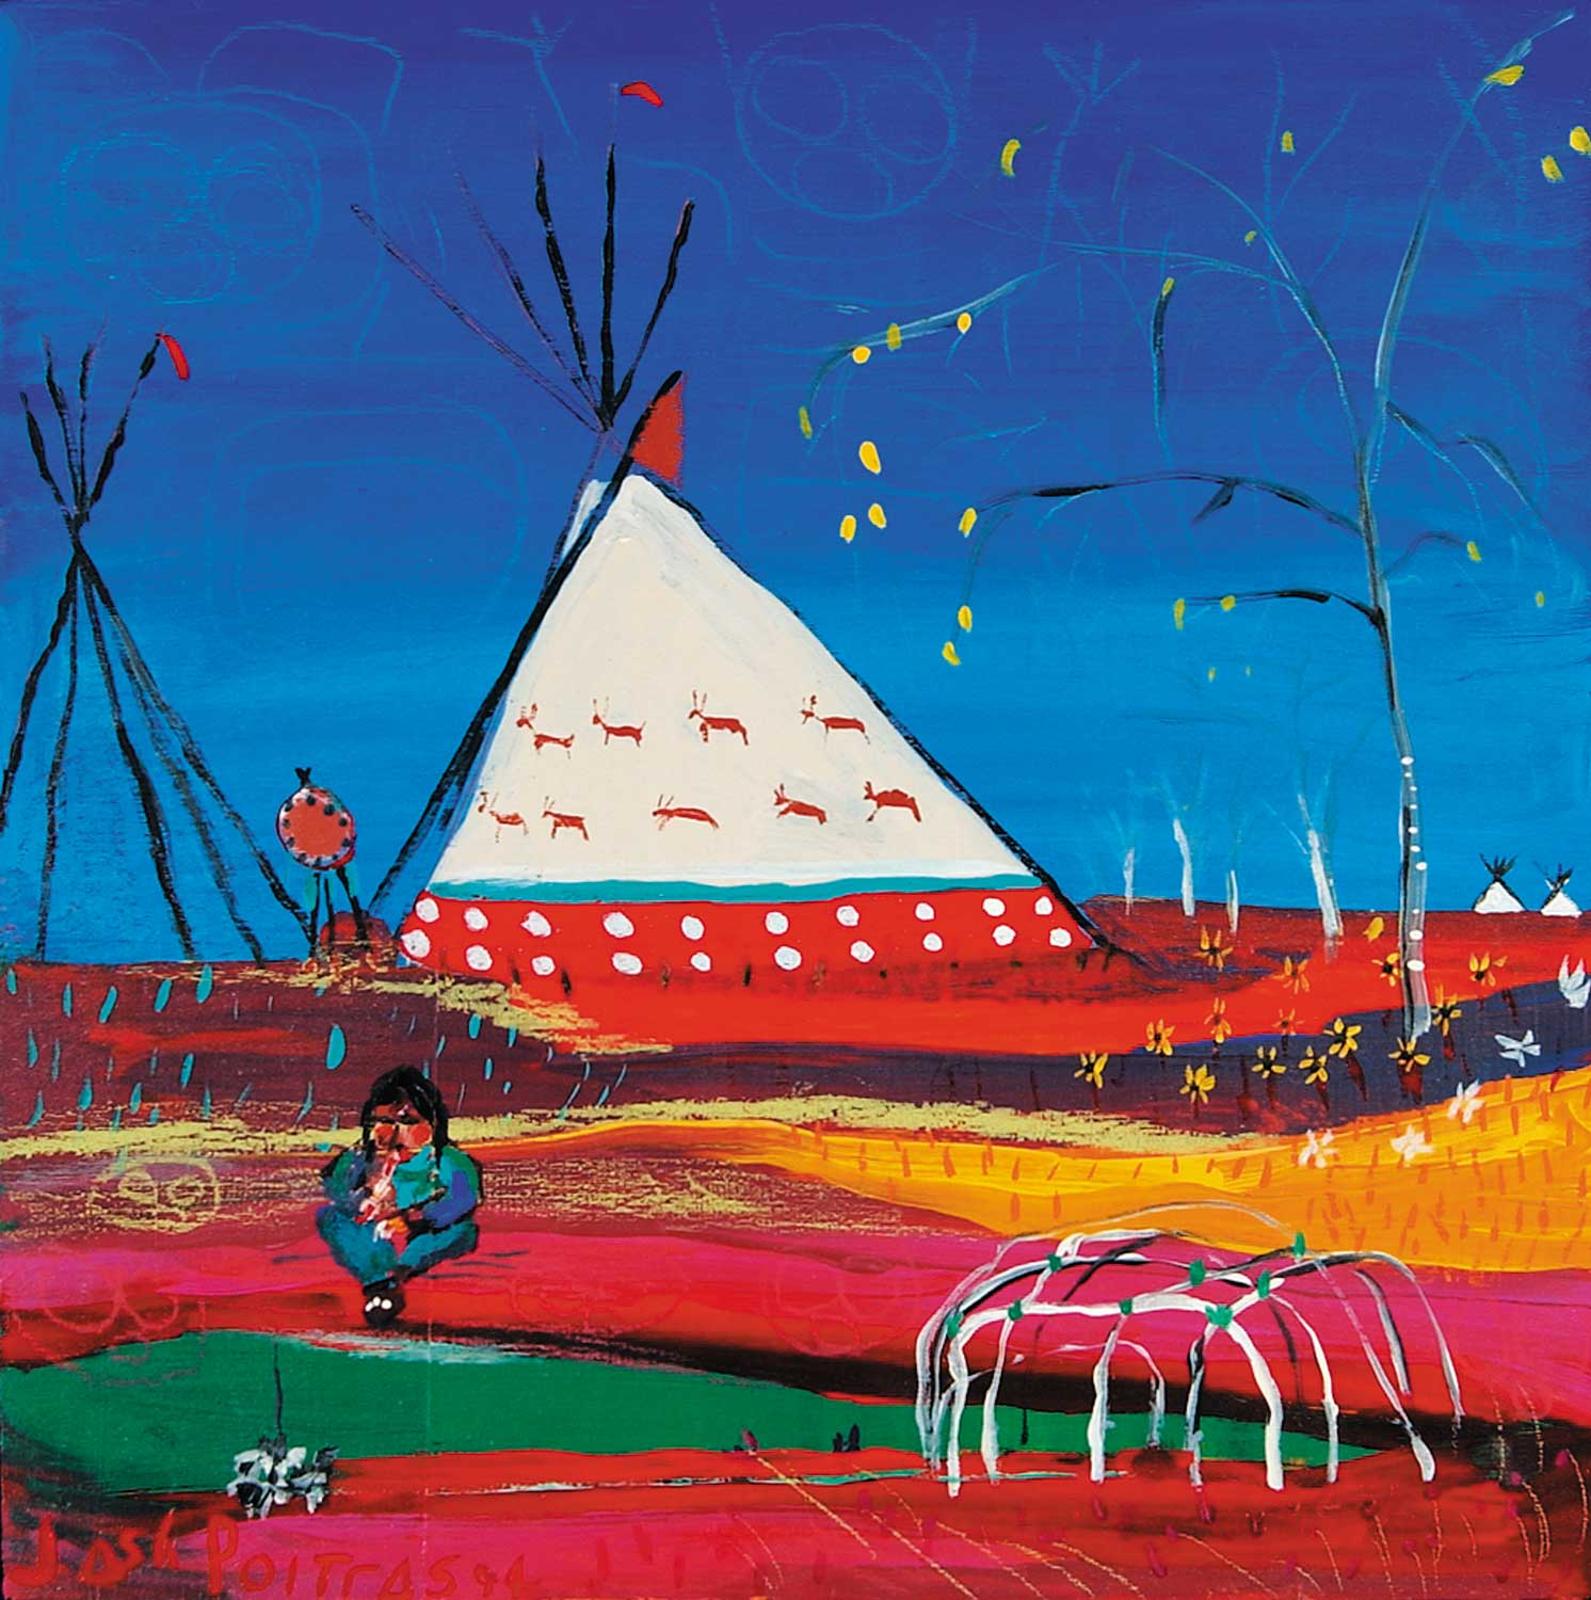 Jane Ash Poitras (1951) - Untitled - Flute Player with Teepee at the Sweat Lodge